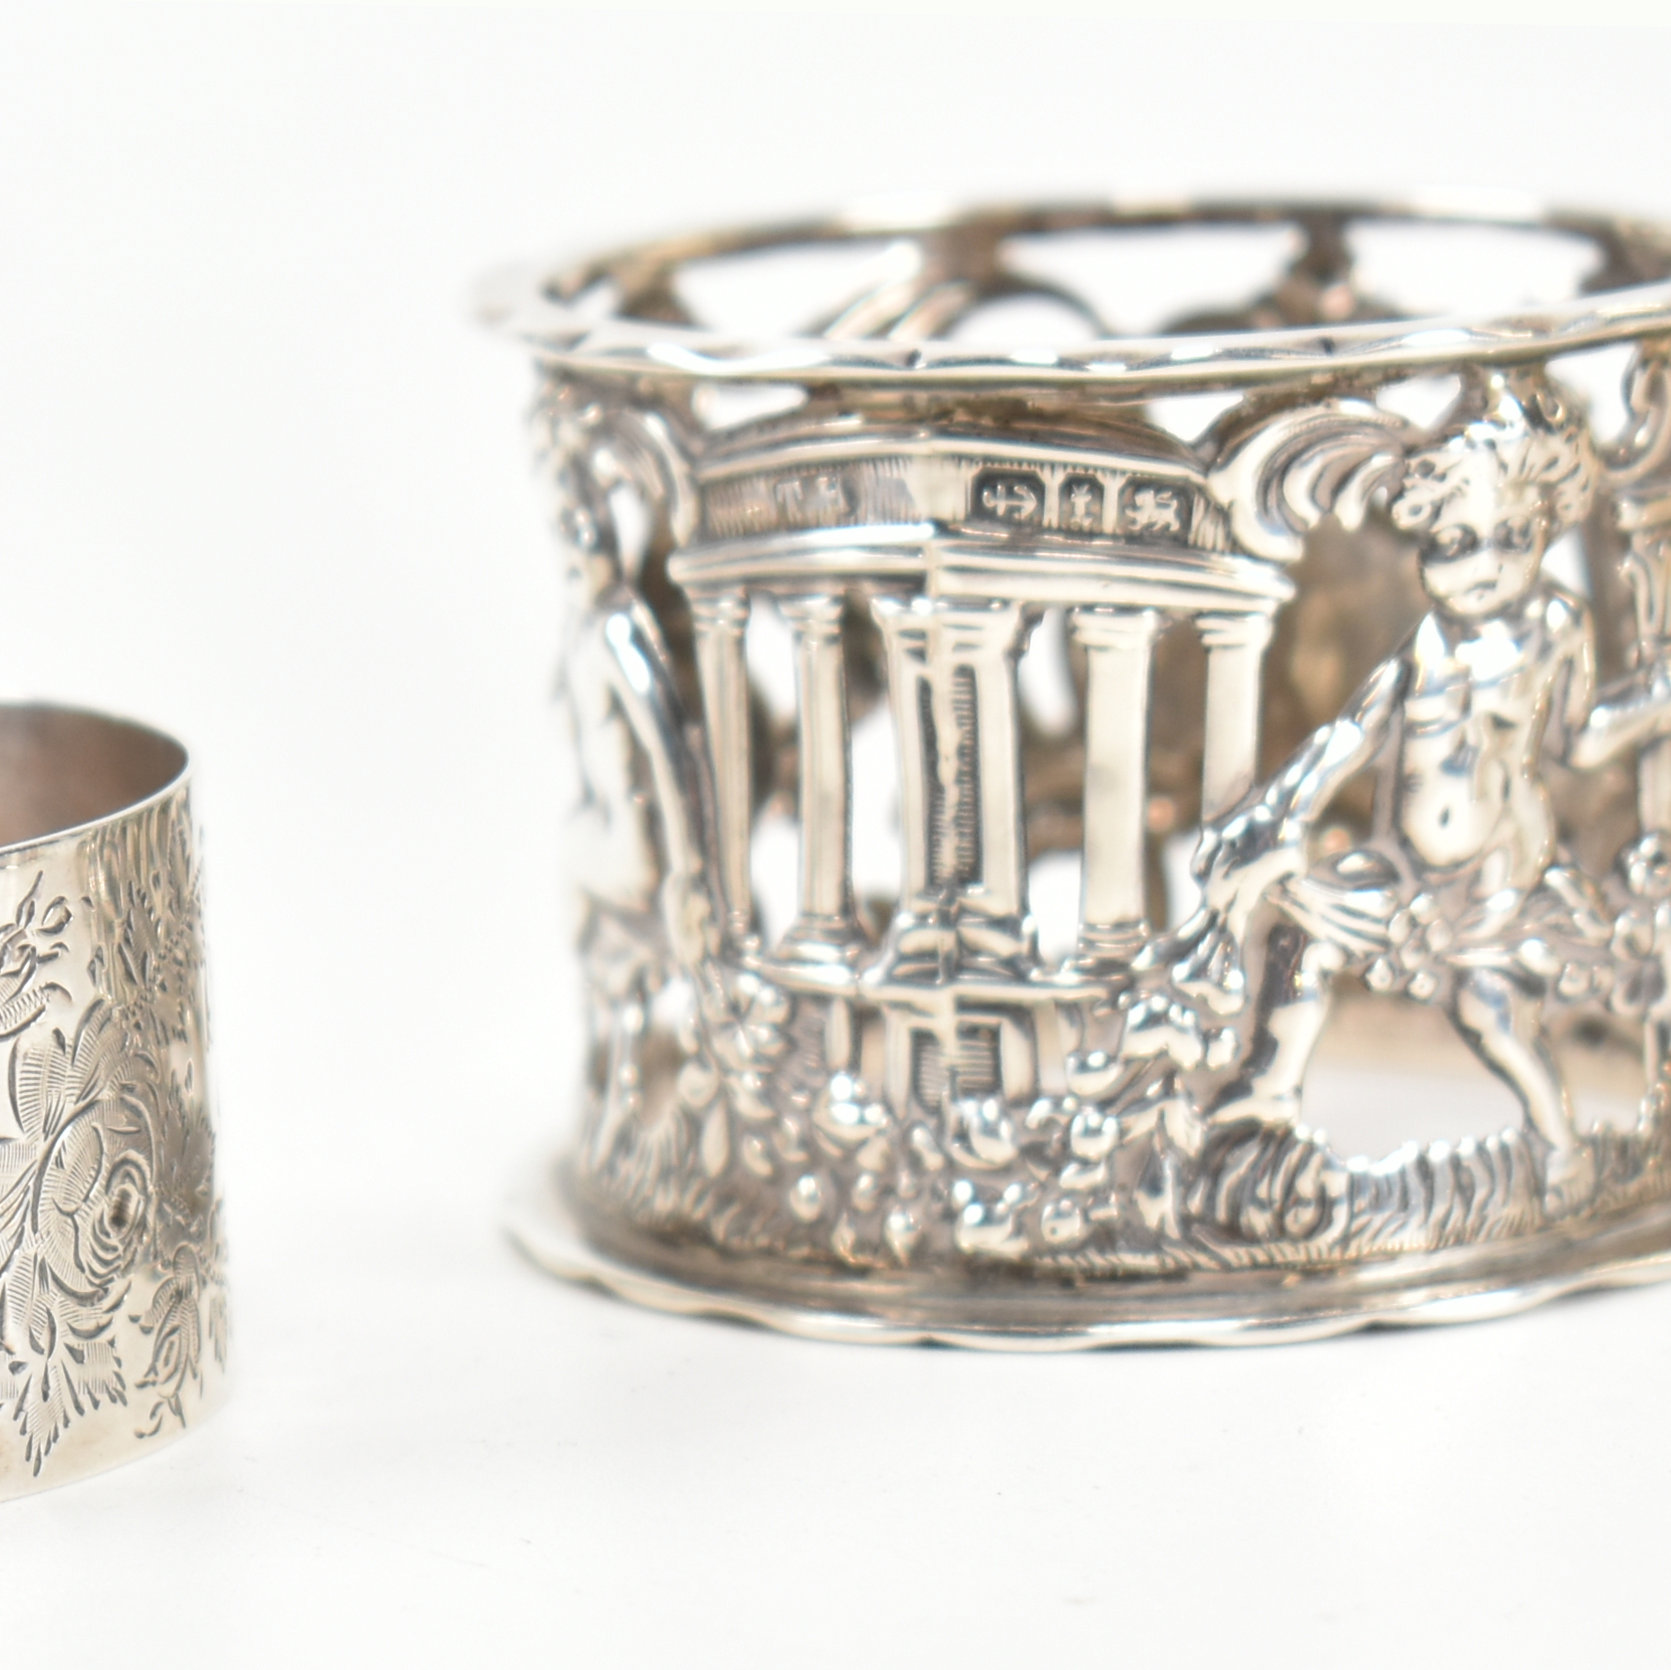 VICTORIAN & LATER HALLMARKED SILVER ITEMS CUP & NAPKIN RINGS - Image 7 of 8